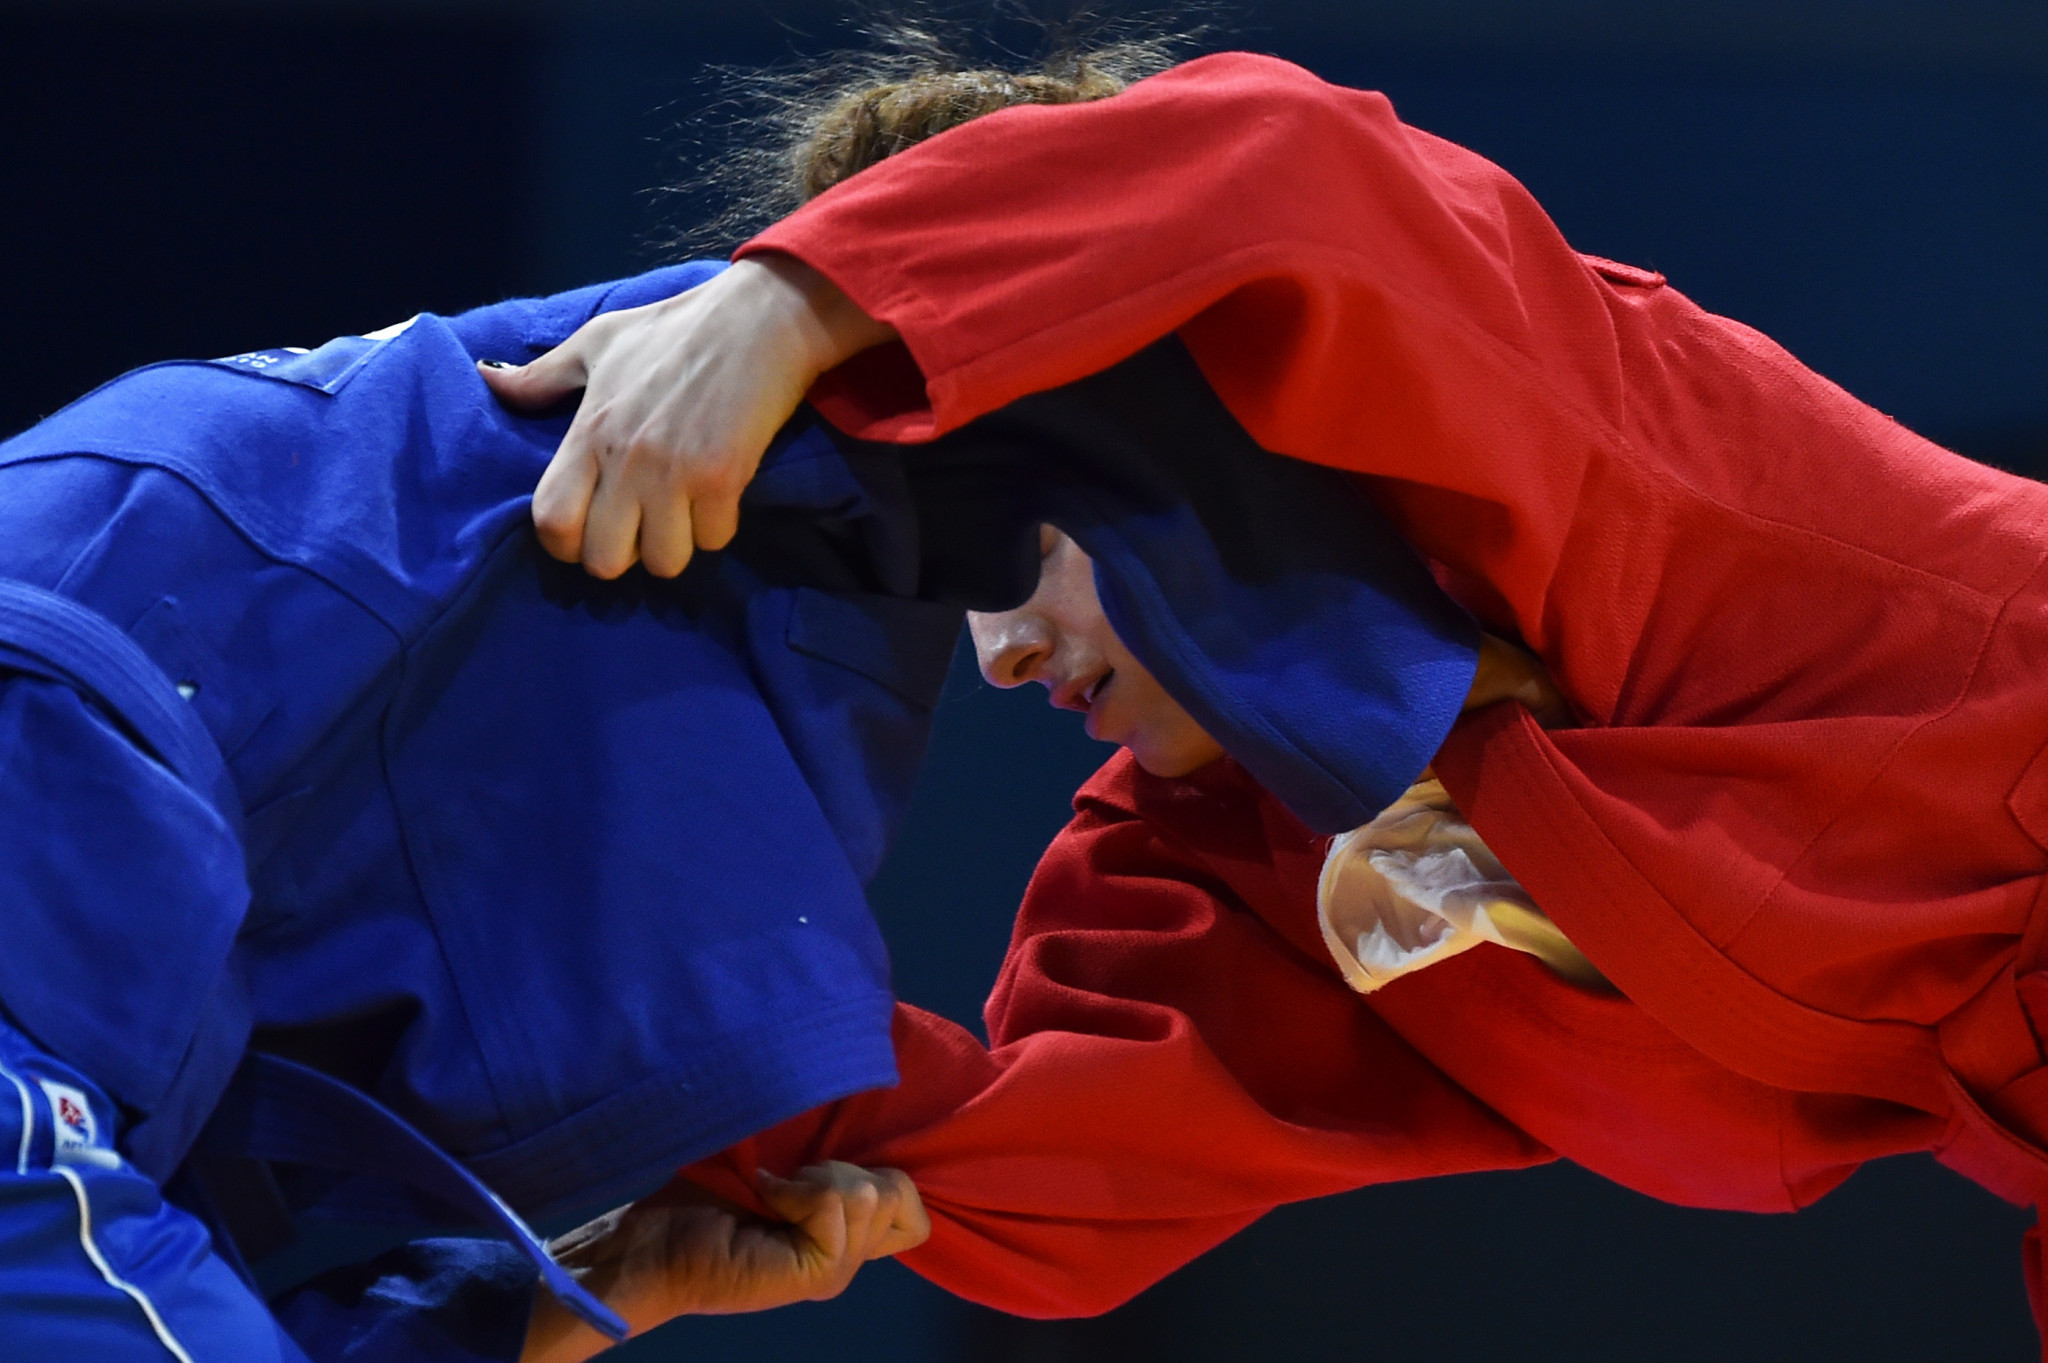 Israel has been awarded the rights to host the European Sambo Championships next year ©FIAS